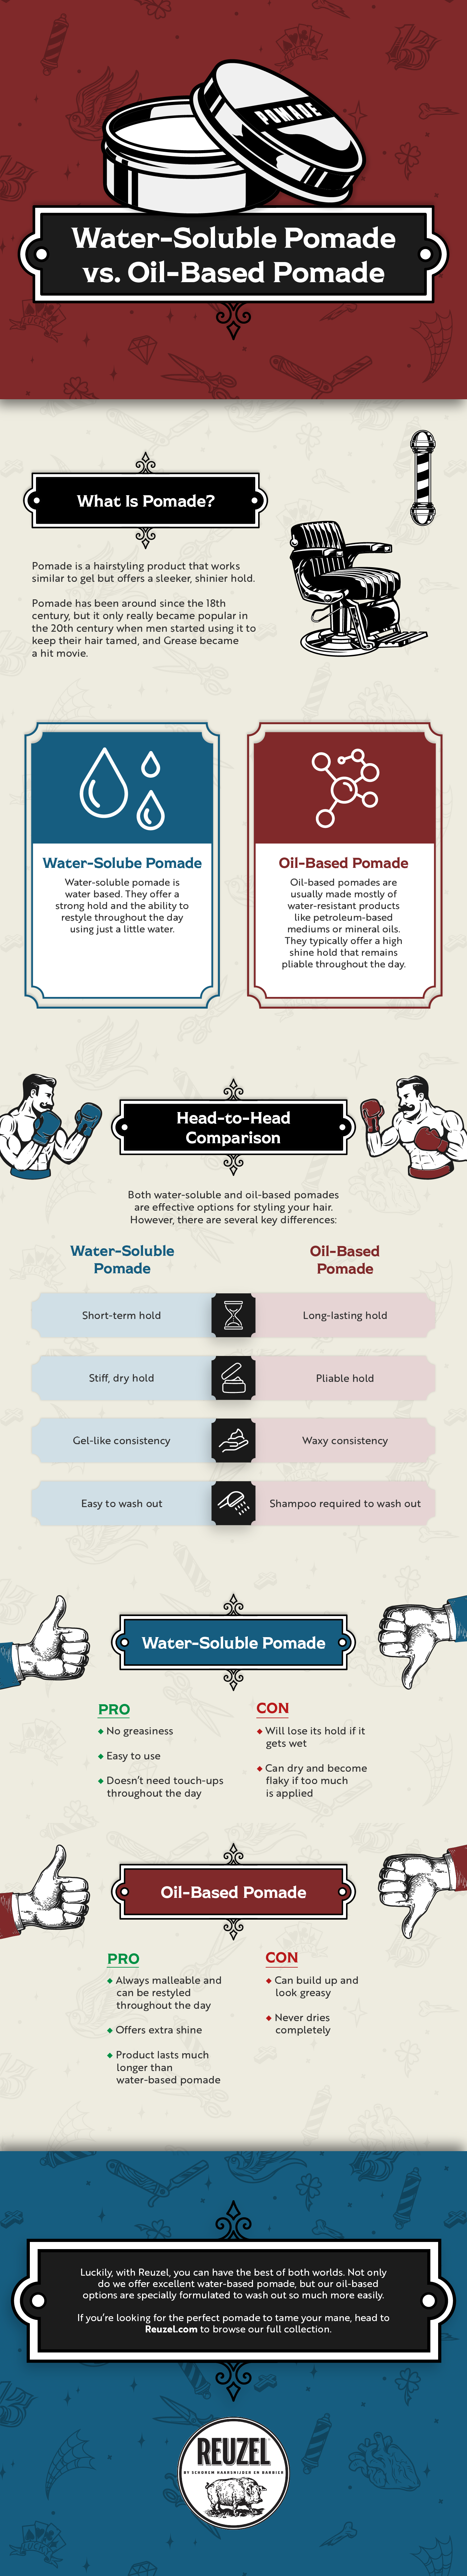 Water-Soluble Pomade vs. Oil-Based Pomade Infographic